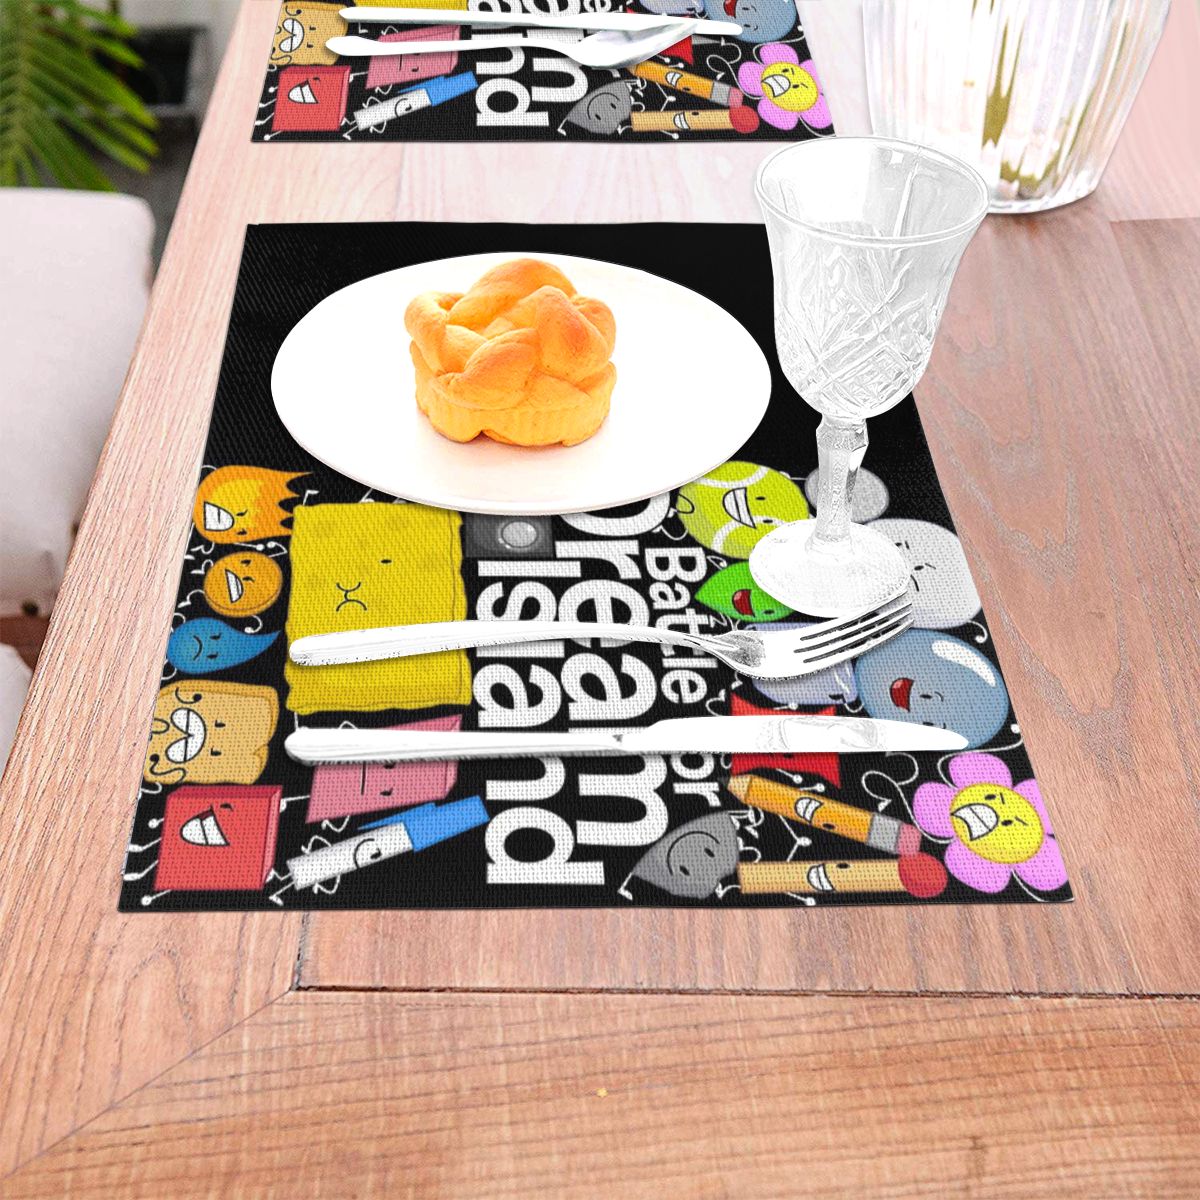 BFDI Poster Black Placemat Beautiful Match with Dark Wood Table Suitable for Barbecue Washable 4 - BFDI Plush